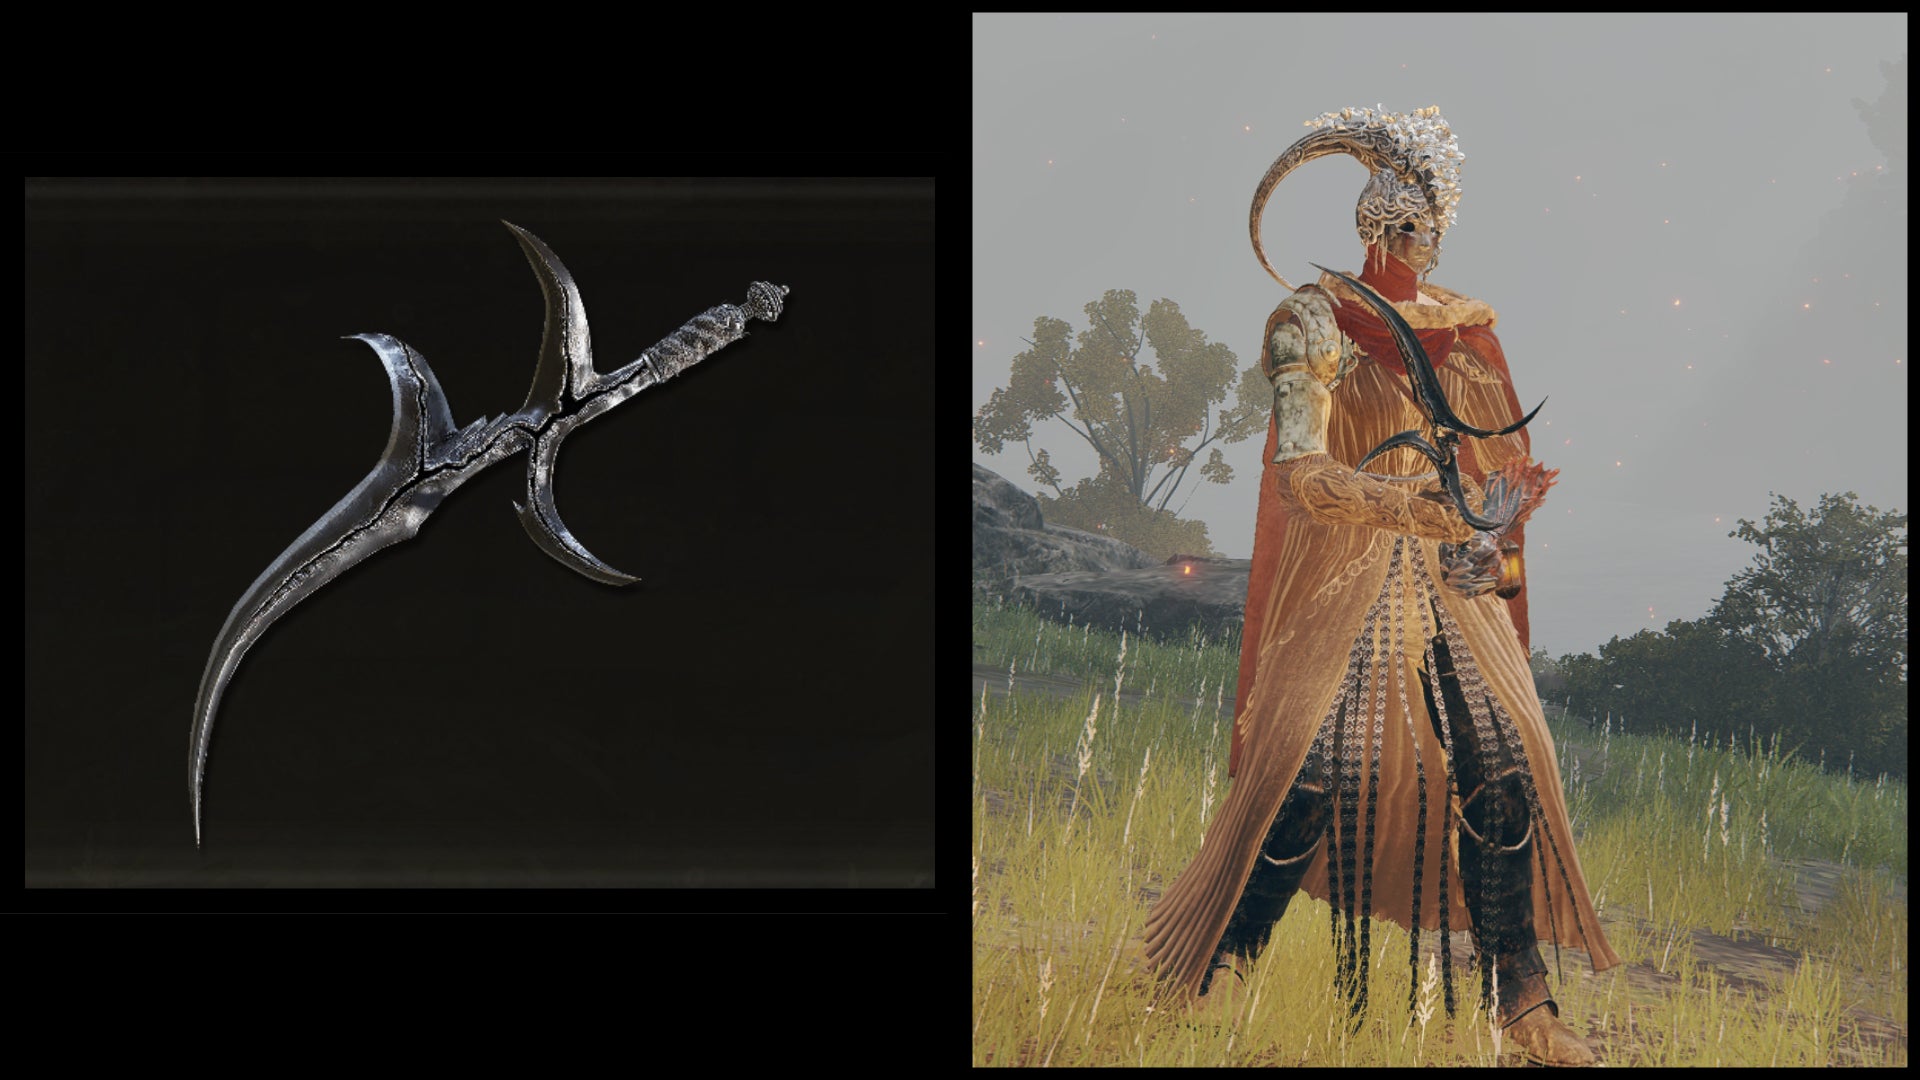 Left: an illustration of the Black Knife from Elden Ring. Right: the player character holding the same weapon against a Limgrave background.